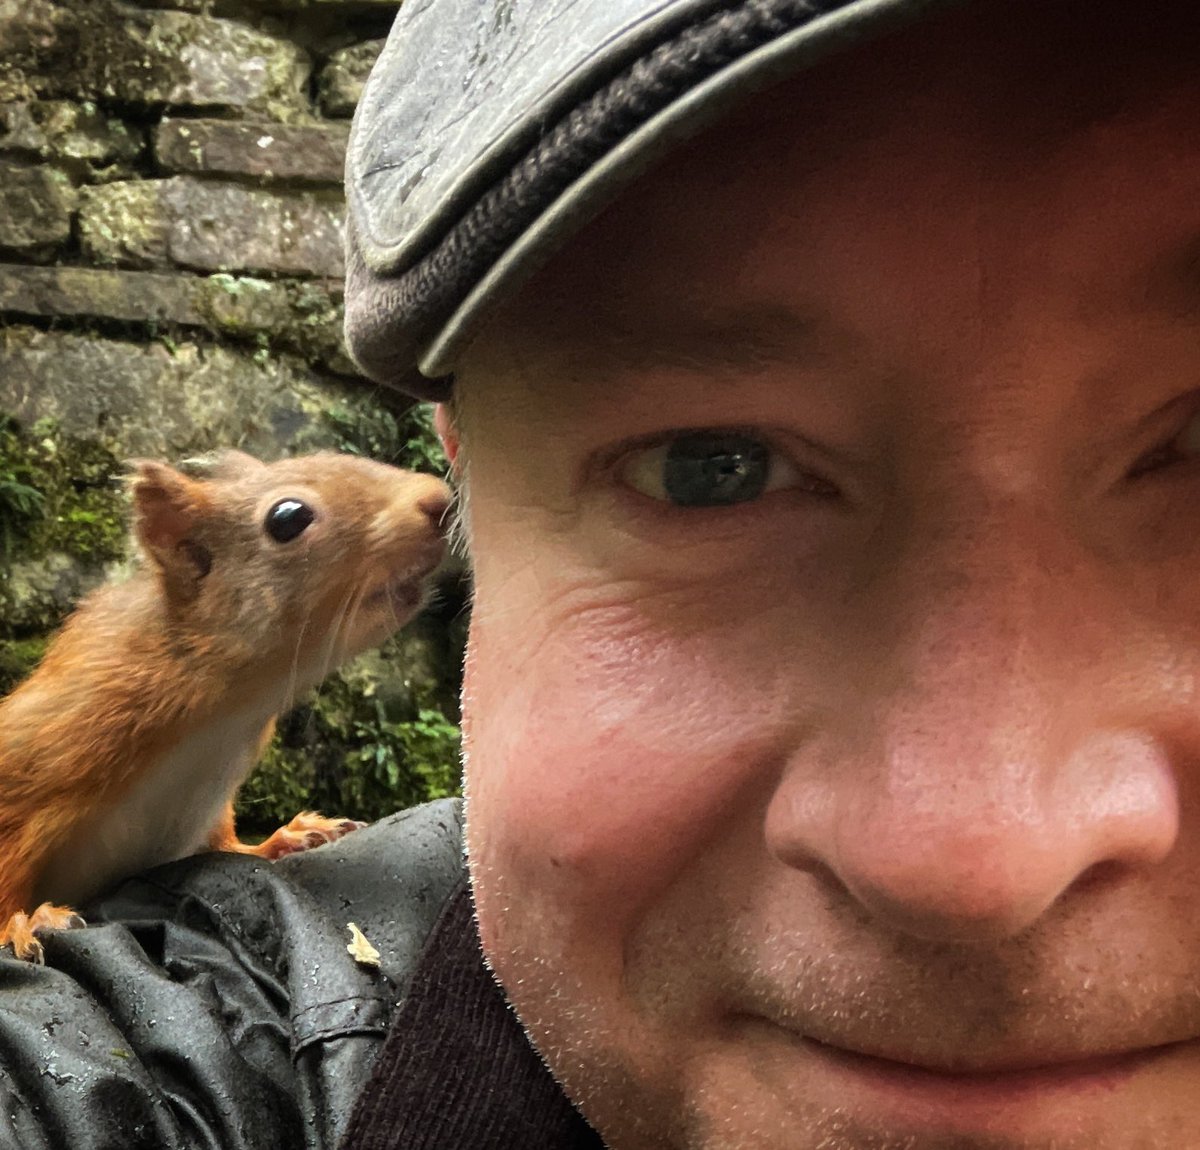 Yours truly will be on @BBC_Cumbria from 7am tomorrow morning with @Mike_Zeller1 talking about my latest acclaimed #lakedistrict film set to hit TV screens this Bank Holiday Monday on BBC Four 🐿️🎥📺 #redsquirrel